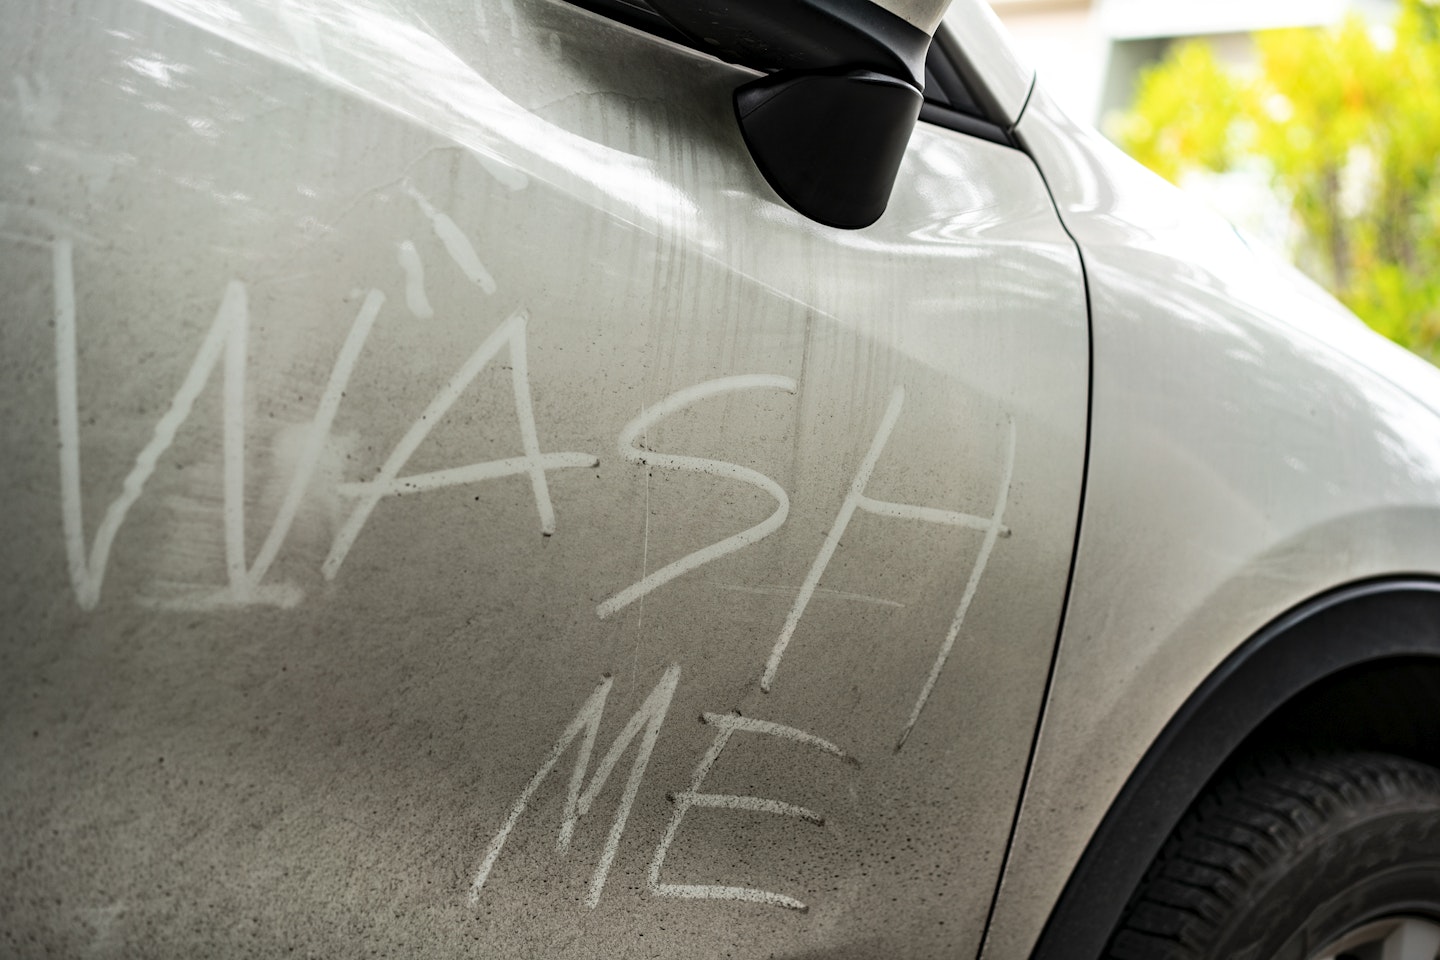 A dirty car with 'wash me' inscribed into the dirt